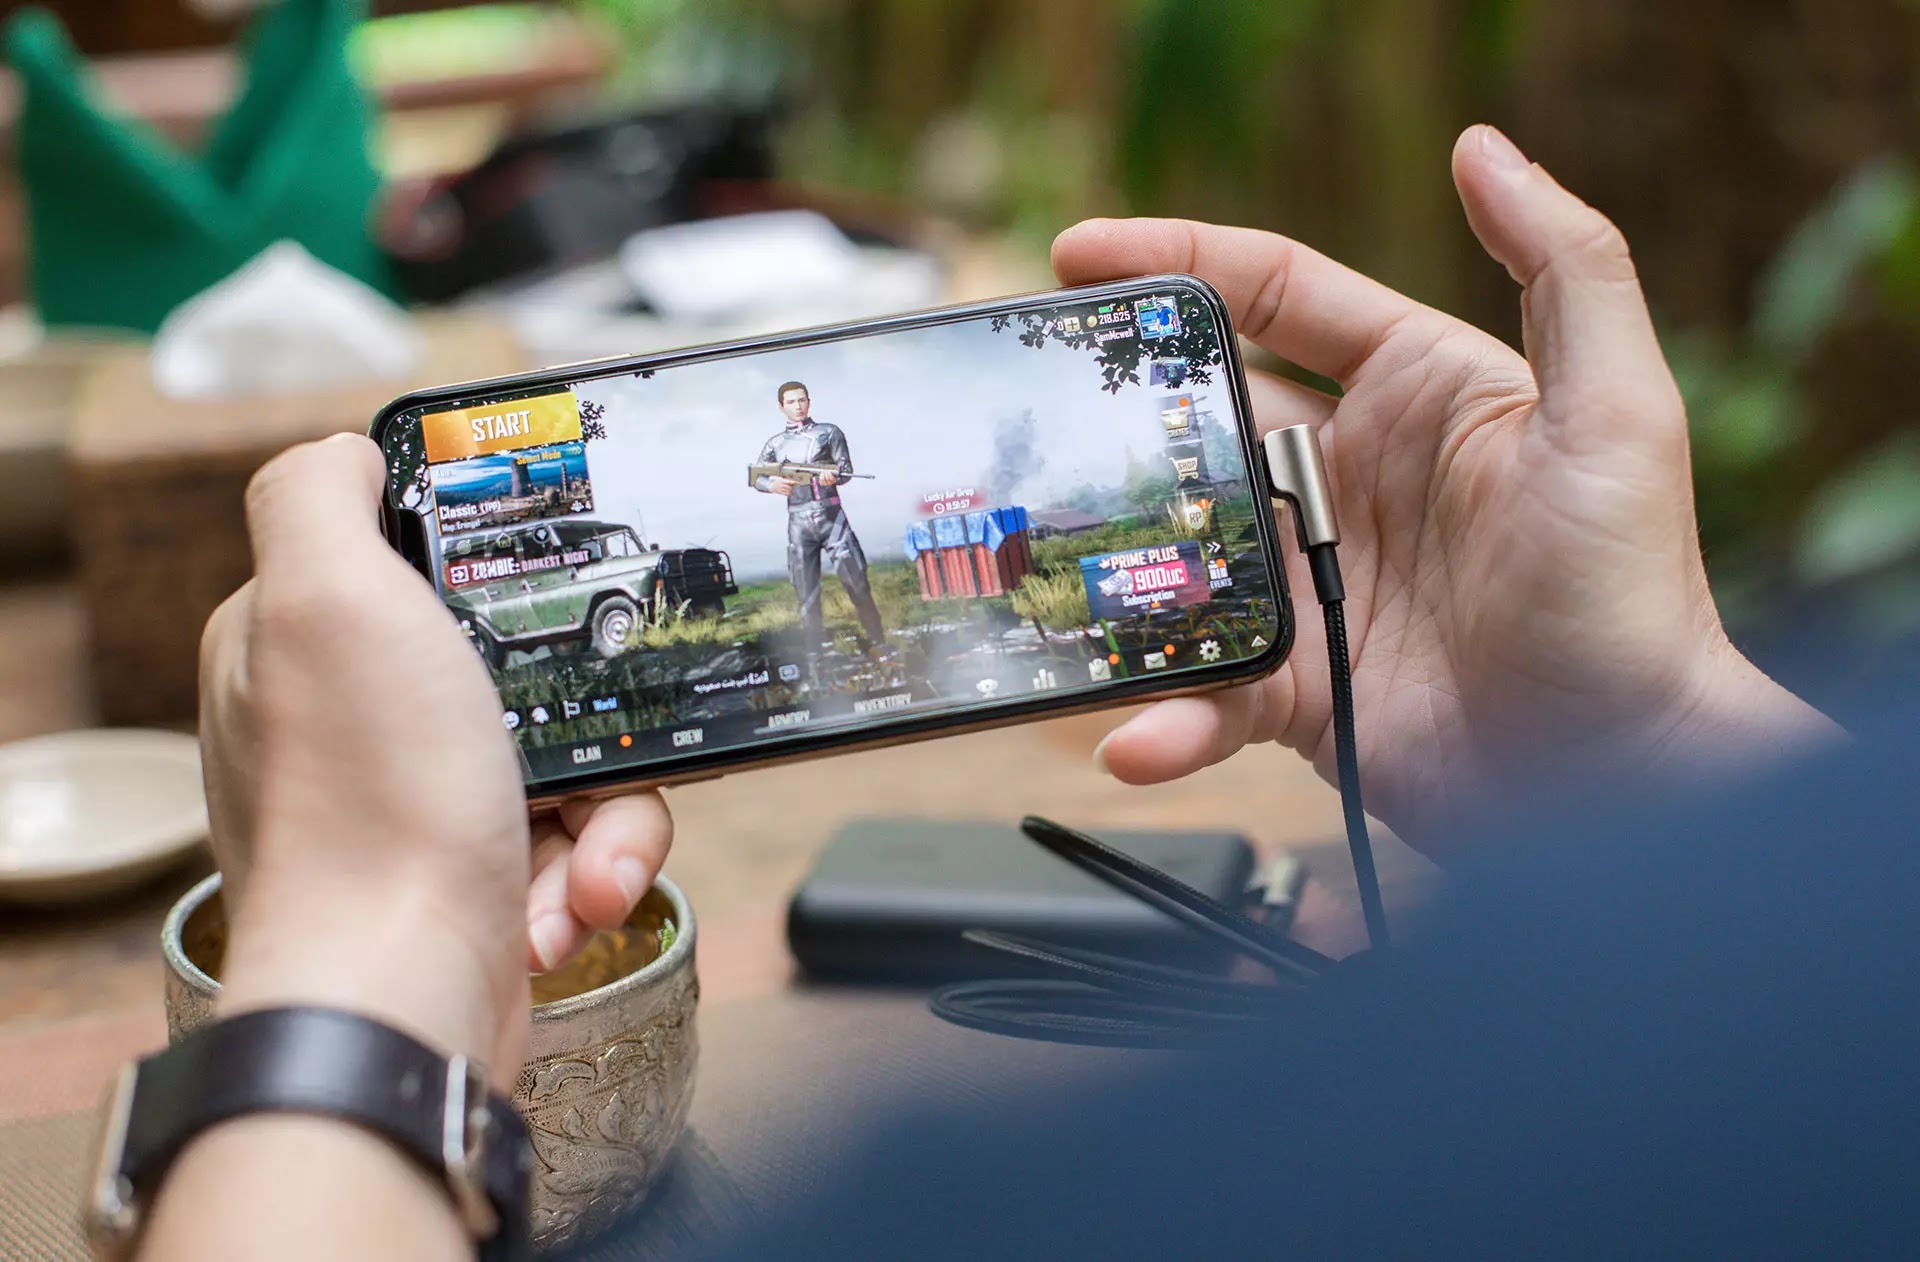 Follow these tips to boost gaming performance on your smartphone